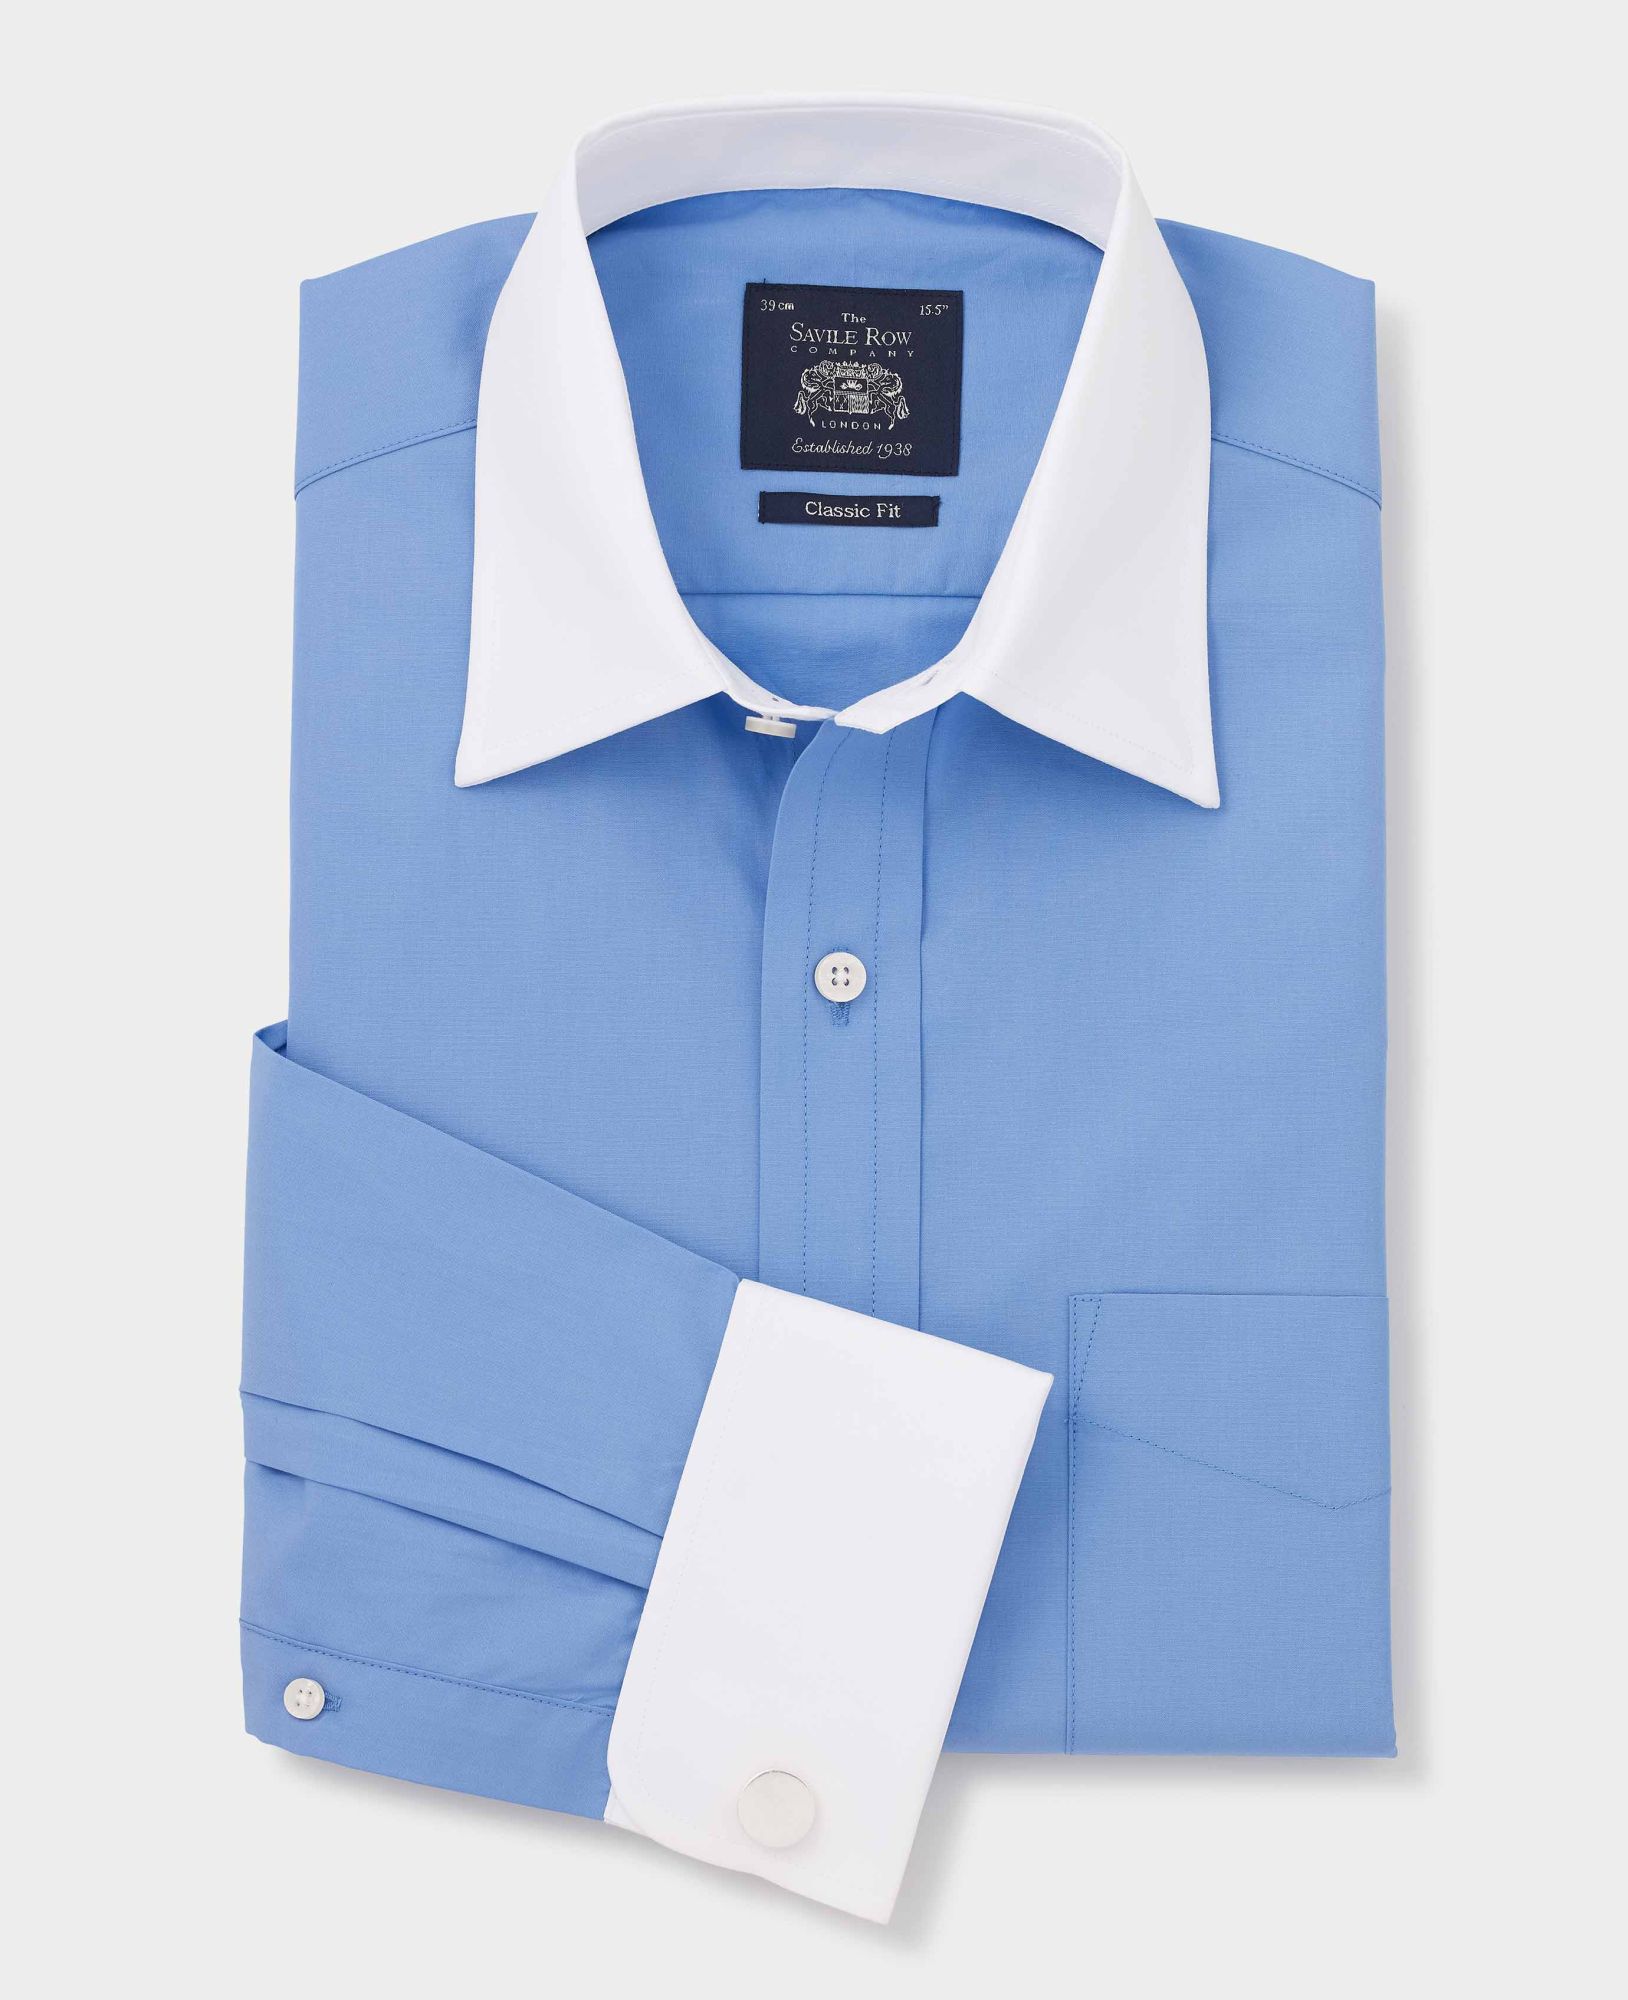 French Blue Classic Fit Shirt With White Collar & Cuffs 20